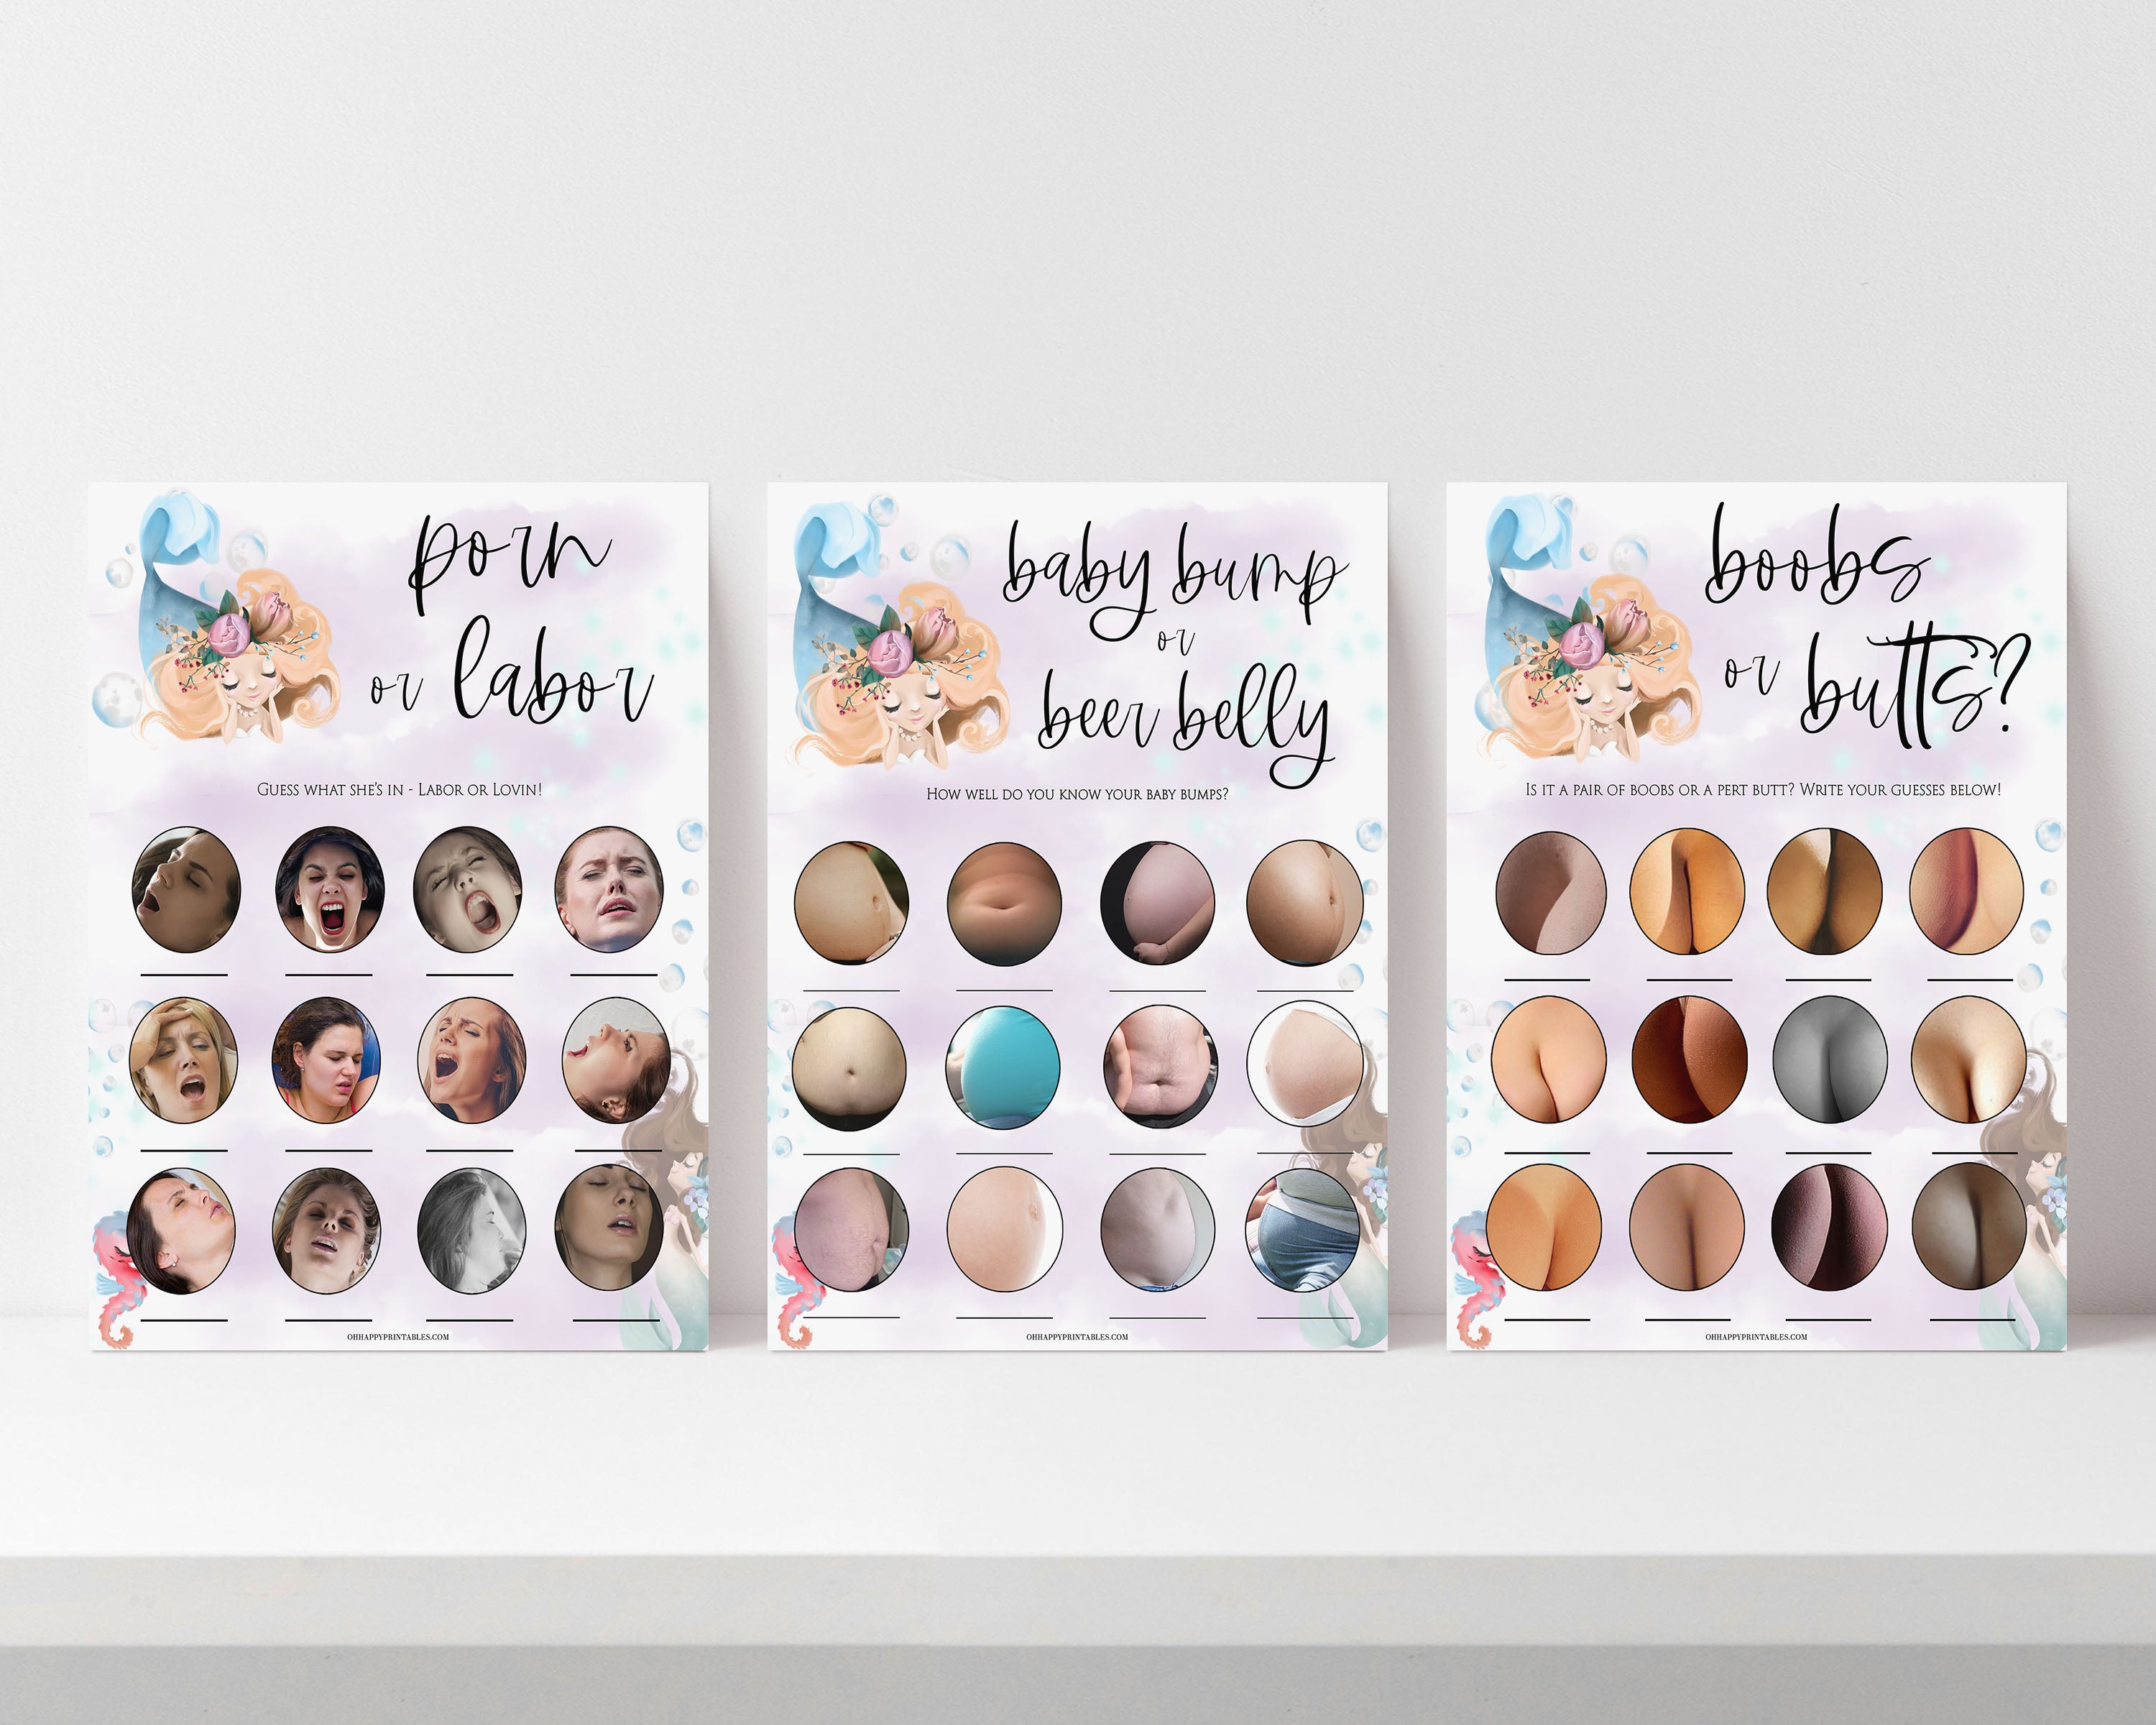 porn or labor, baby bump or beer belly, boobs or butts baby game, Printable baby shower games, little mermaid baby games, baby shower games, fun baby shower ideas, top baby shower ideas, little mermaid baby shower, baby shower games, pink hearts baby shower ideas